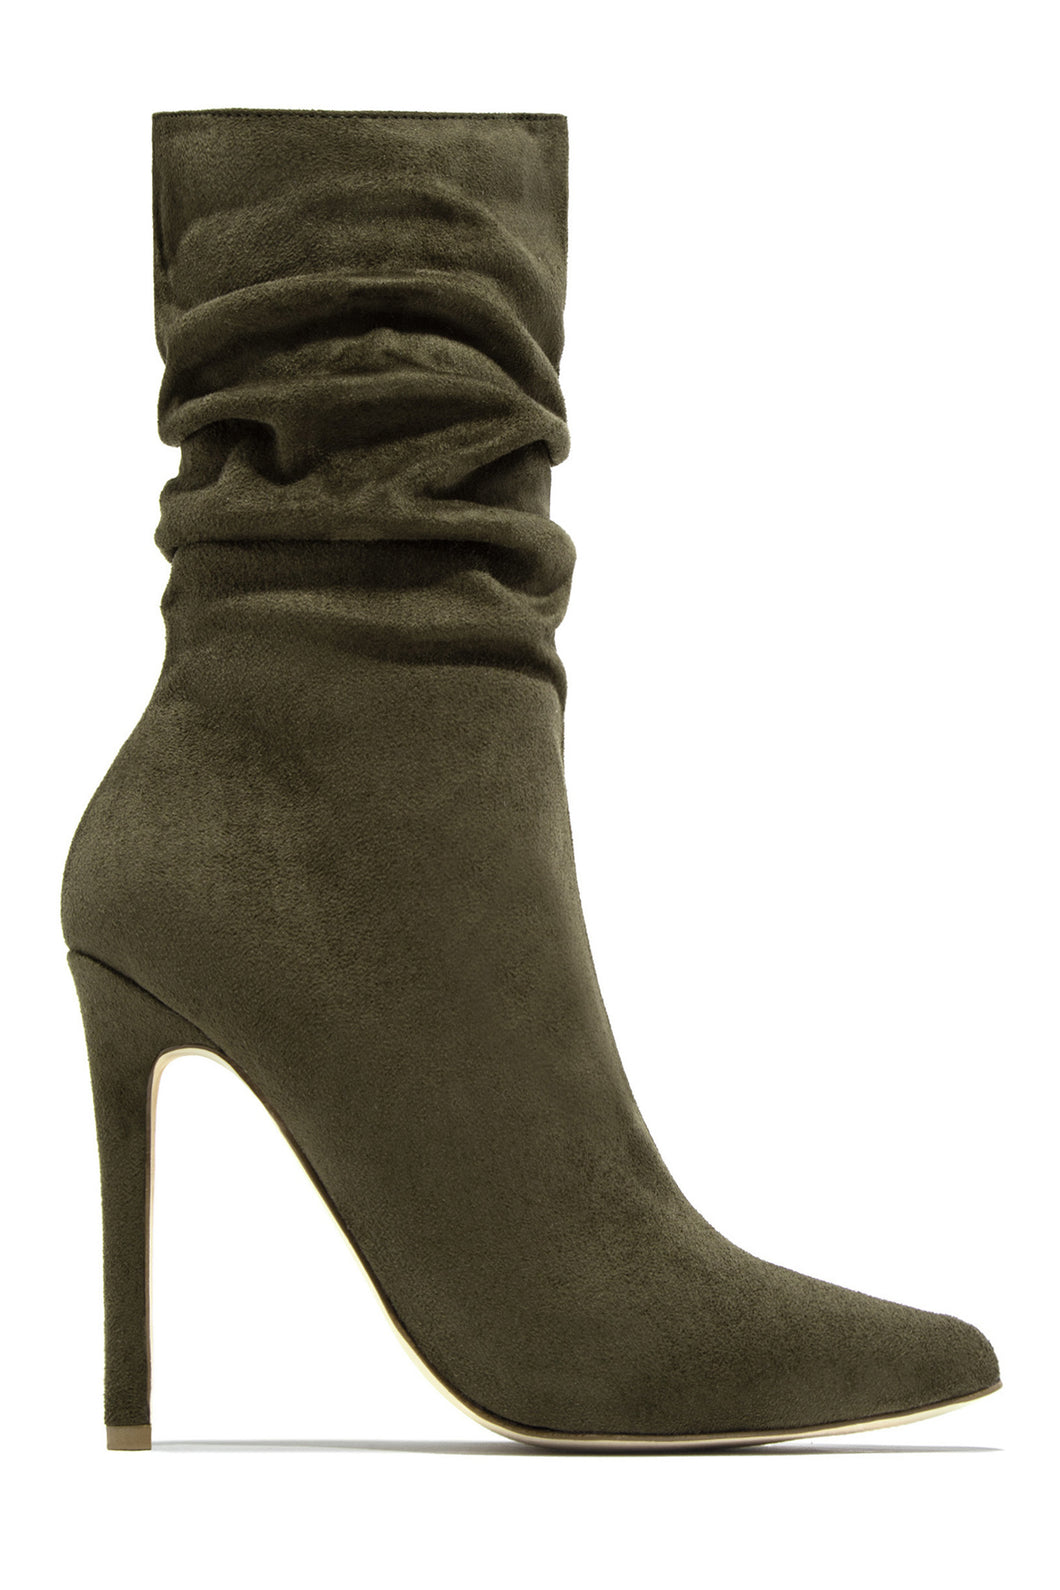 Solemate Ruched Detailed Ankle Heel Boots - Olive